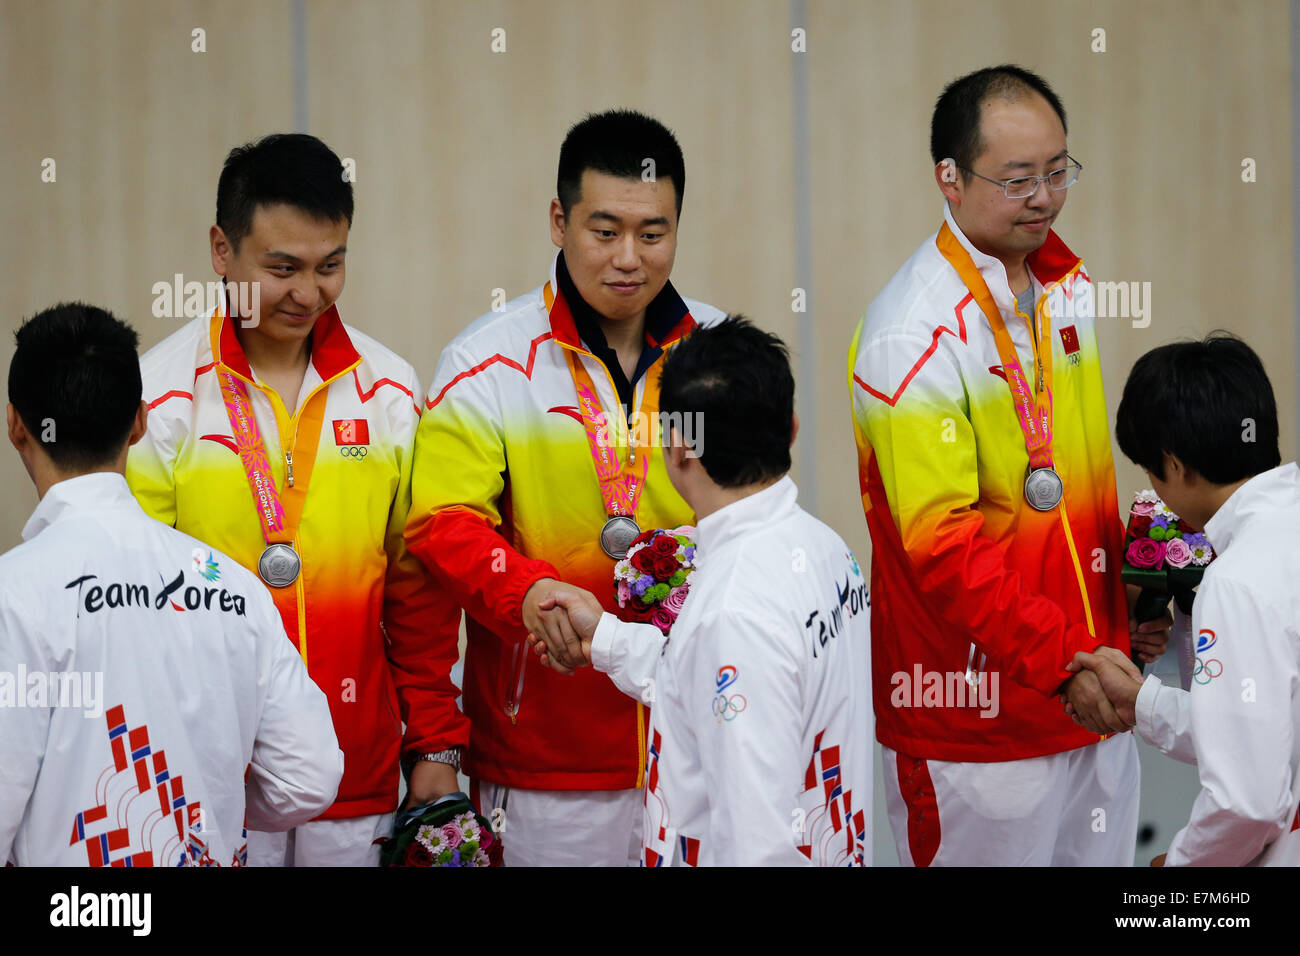 Incheon, South Korea. 21st Sep, 2014. Wang Zhiwei, Pang Wei and Pu Qifeng (L to R) of China shake hands with players of South Korean team during the awarding ceremony of the 10m Pistol men's team finals of shooting event at the 17th Asian Games in Incheon, South Korea, Sept. 21, 2014. Chinese team won the silver medal with 1,743 points. Credit:  Zhang Fan/Xinhua/Alamy Live News Stock Photo